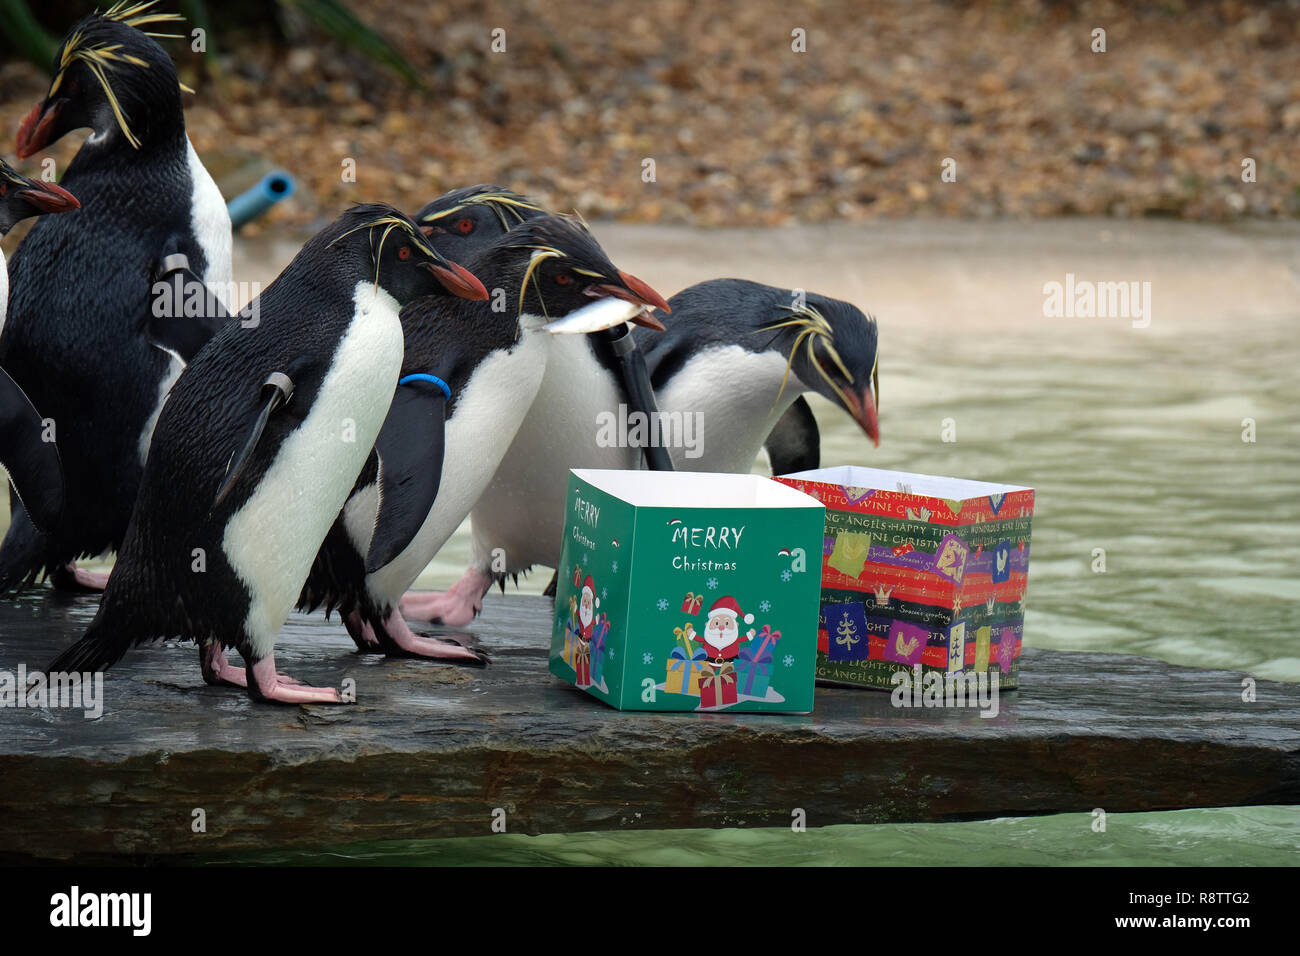 ZSL Whipsnade: Bedfordshire. UK 18th December 2018. Rockhopper penguins getting an early Christmas present of their favourite fish 'credit Stuart Rose/Alamy Live News' Stock Photo